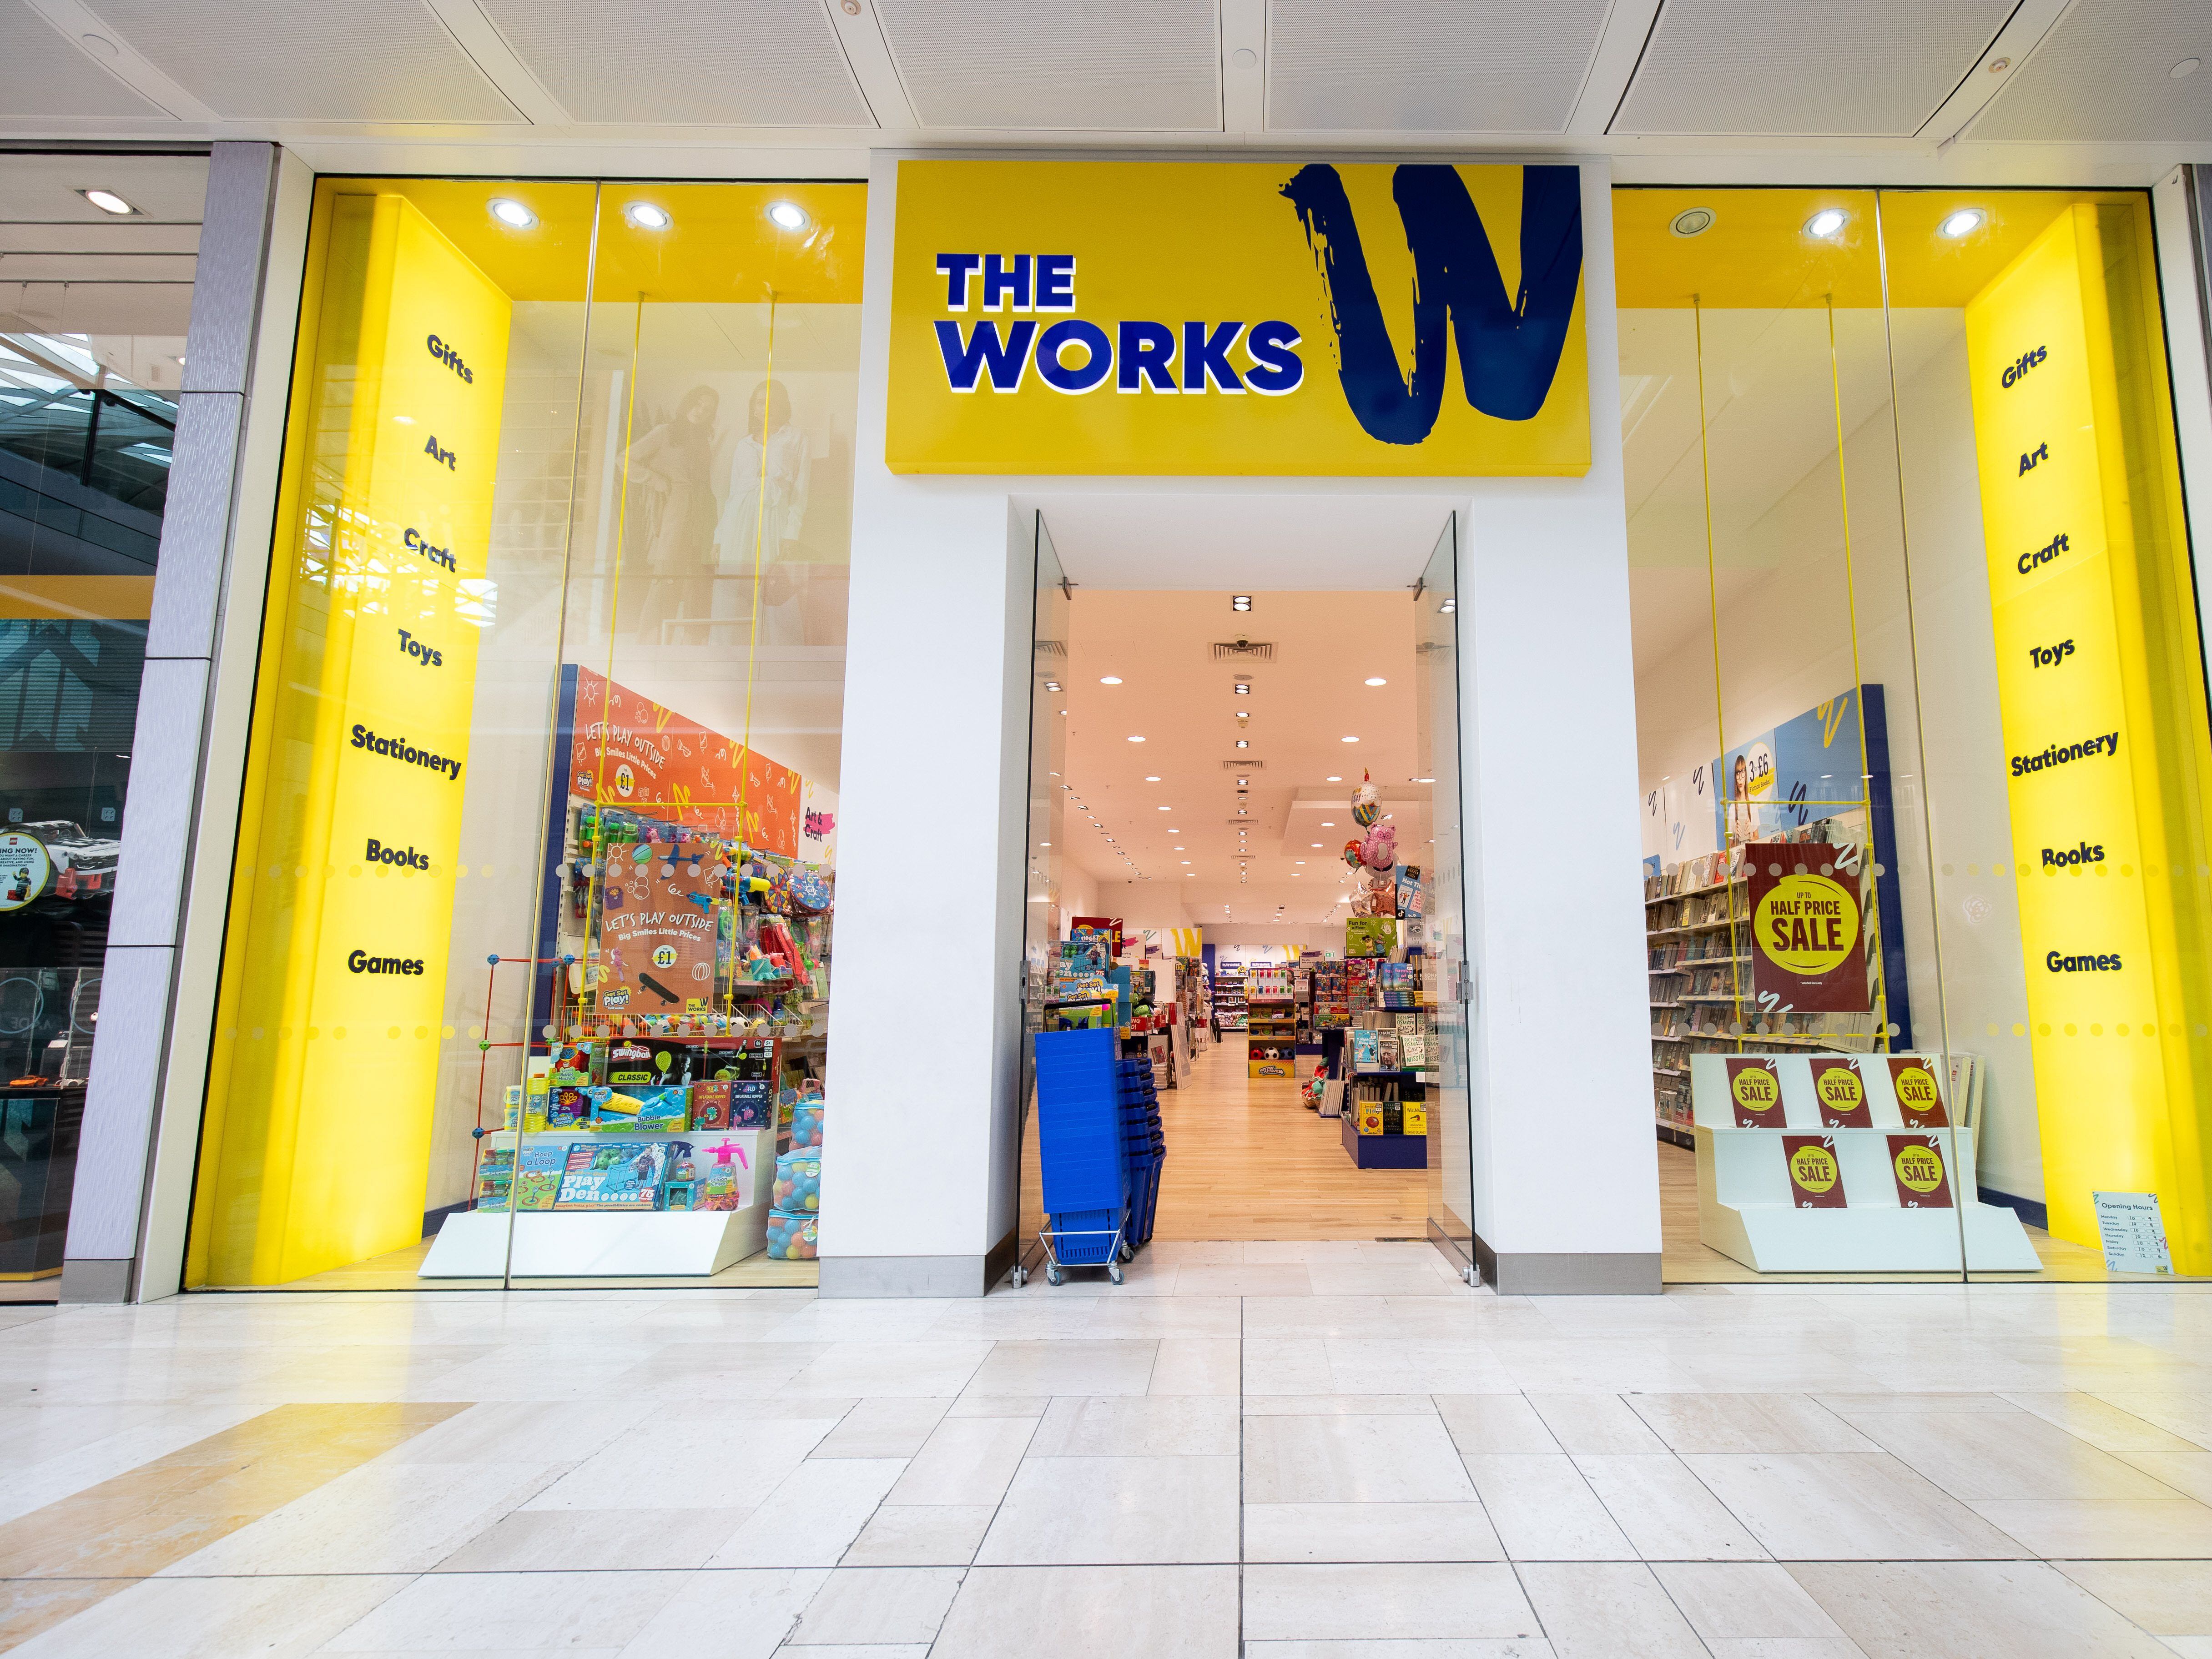 Sales improve for The Works